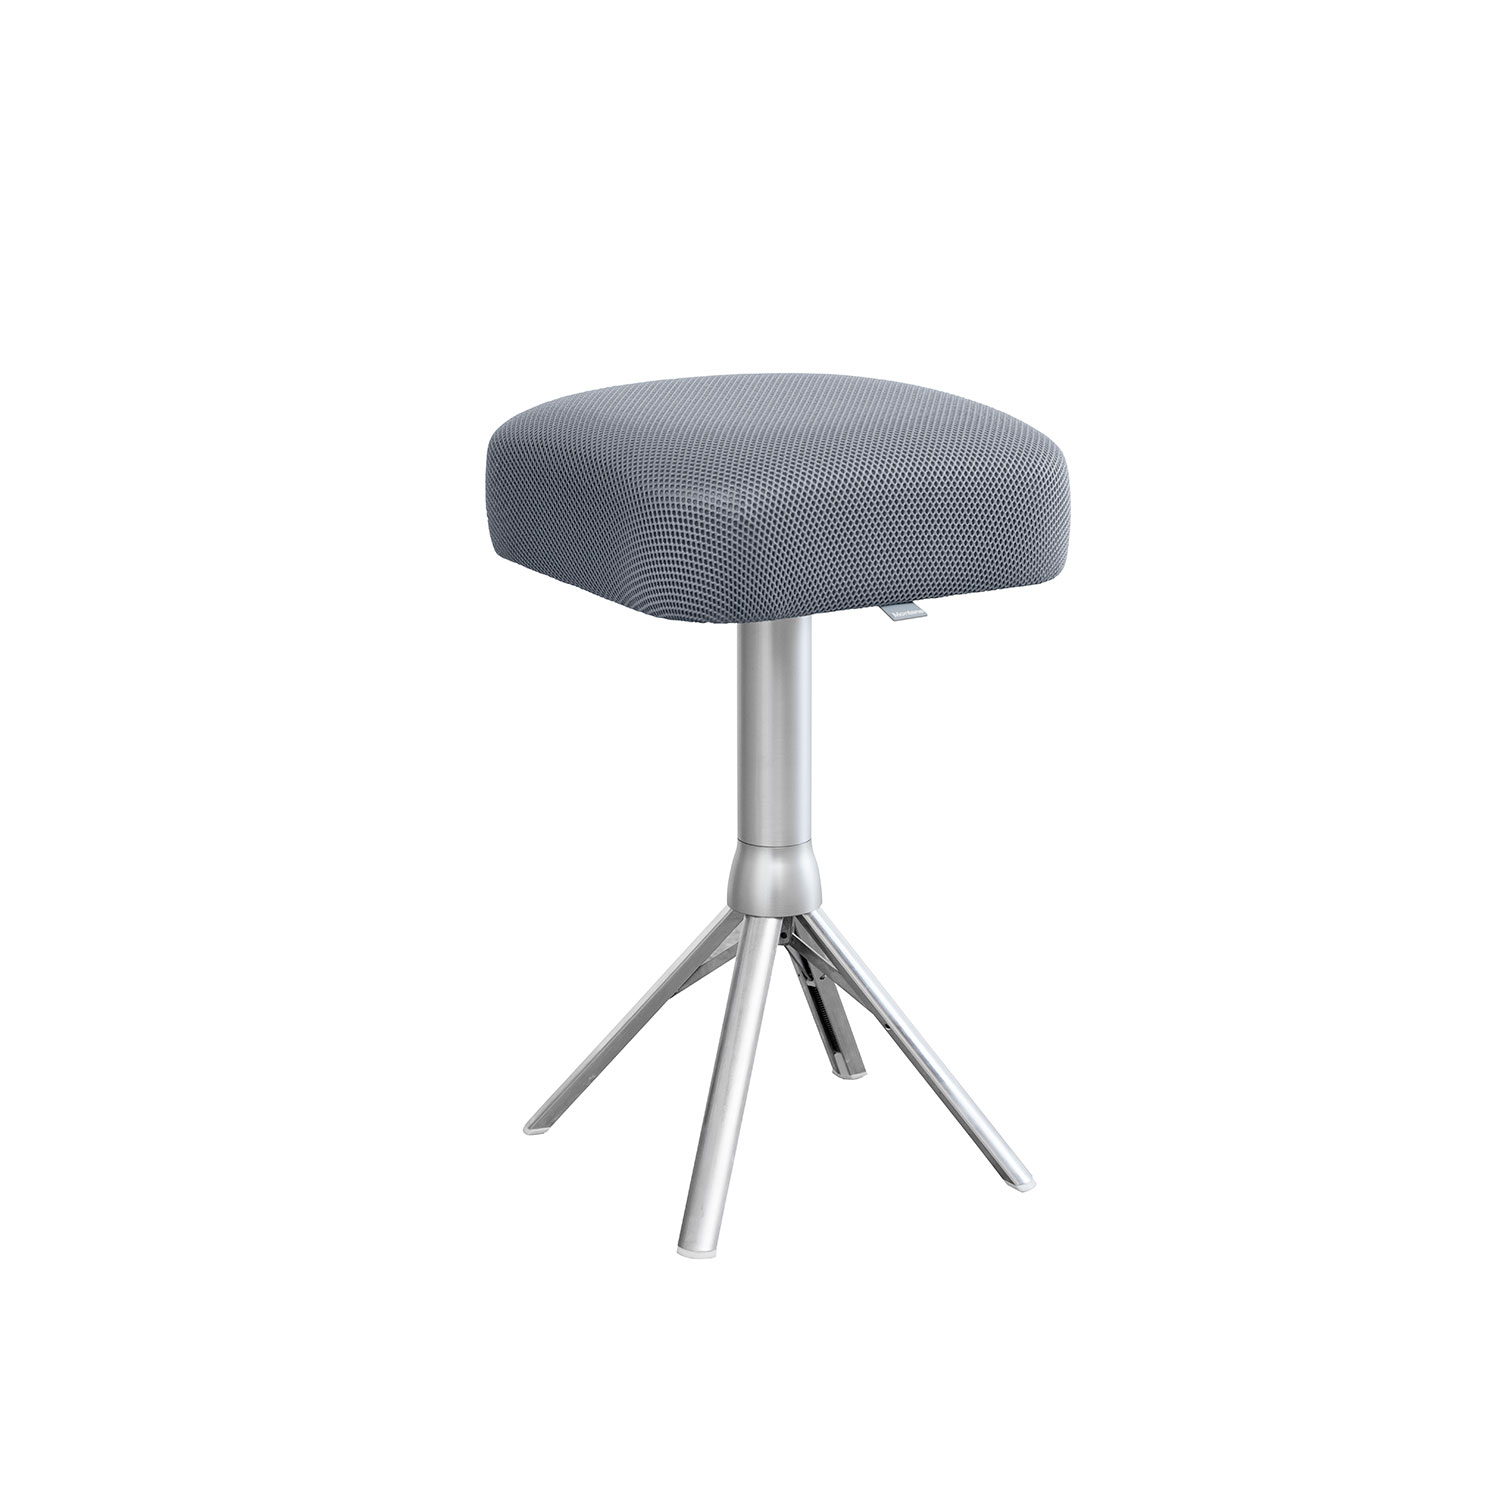 Guest foldable stool, Sugoi (light grey)